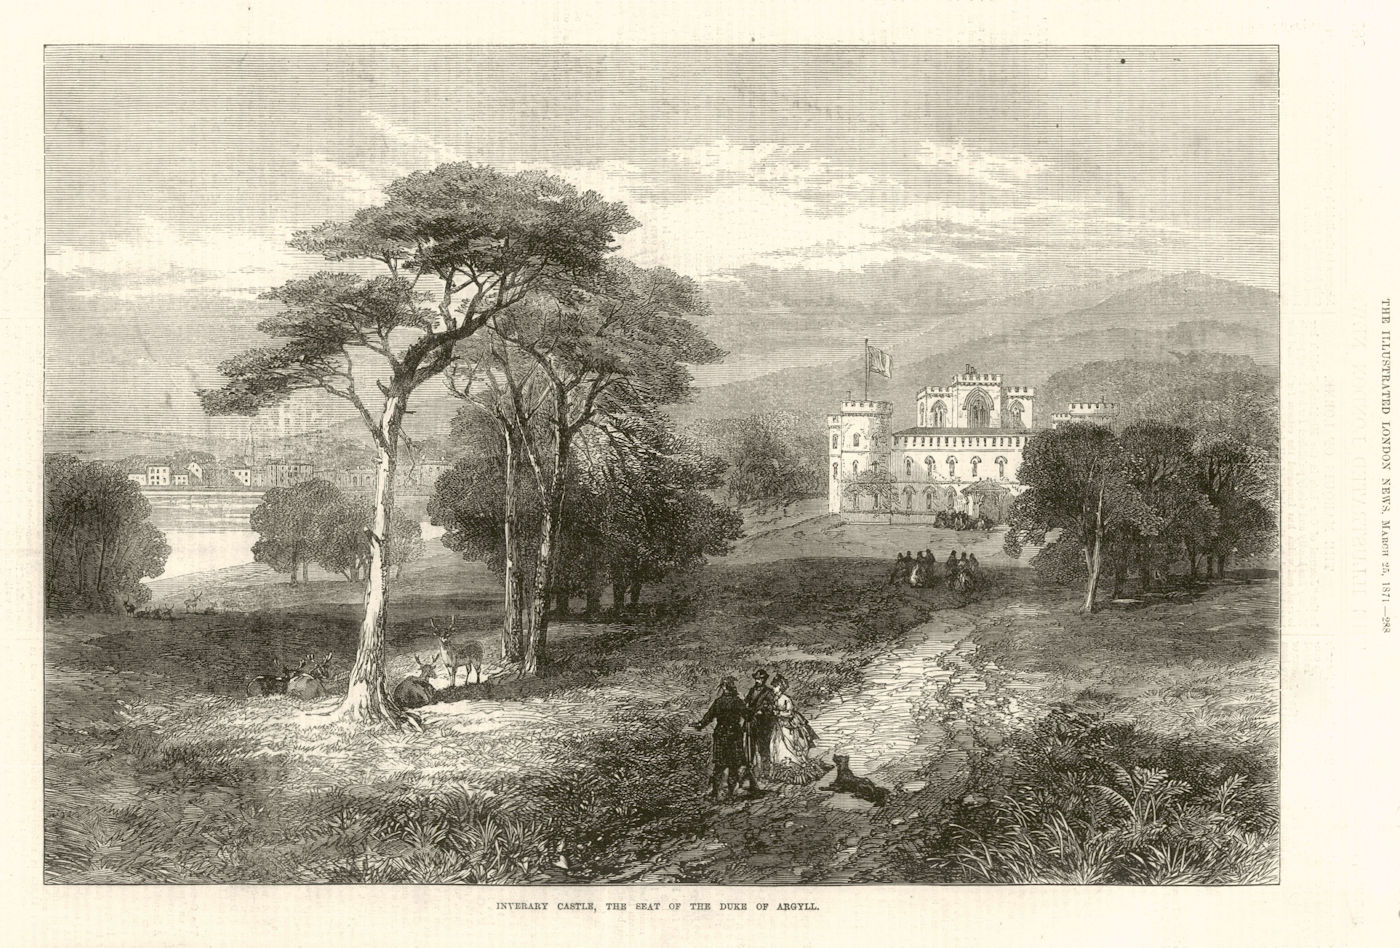 Inverary Castle, the seat of the Duke of Argyll. Scotland 1871 old print